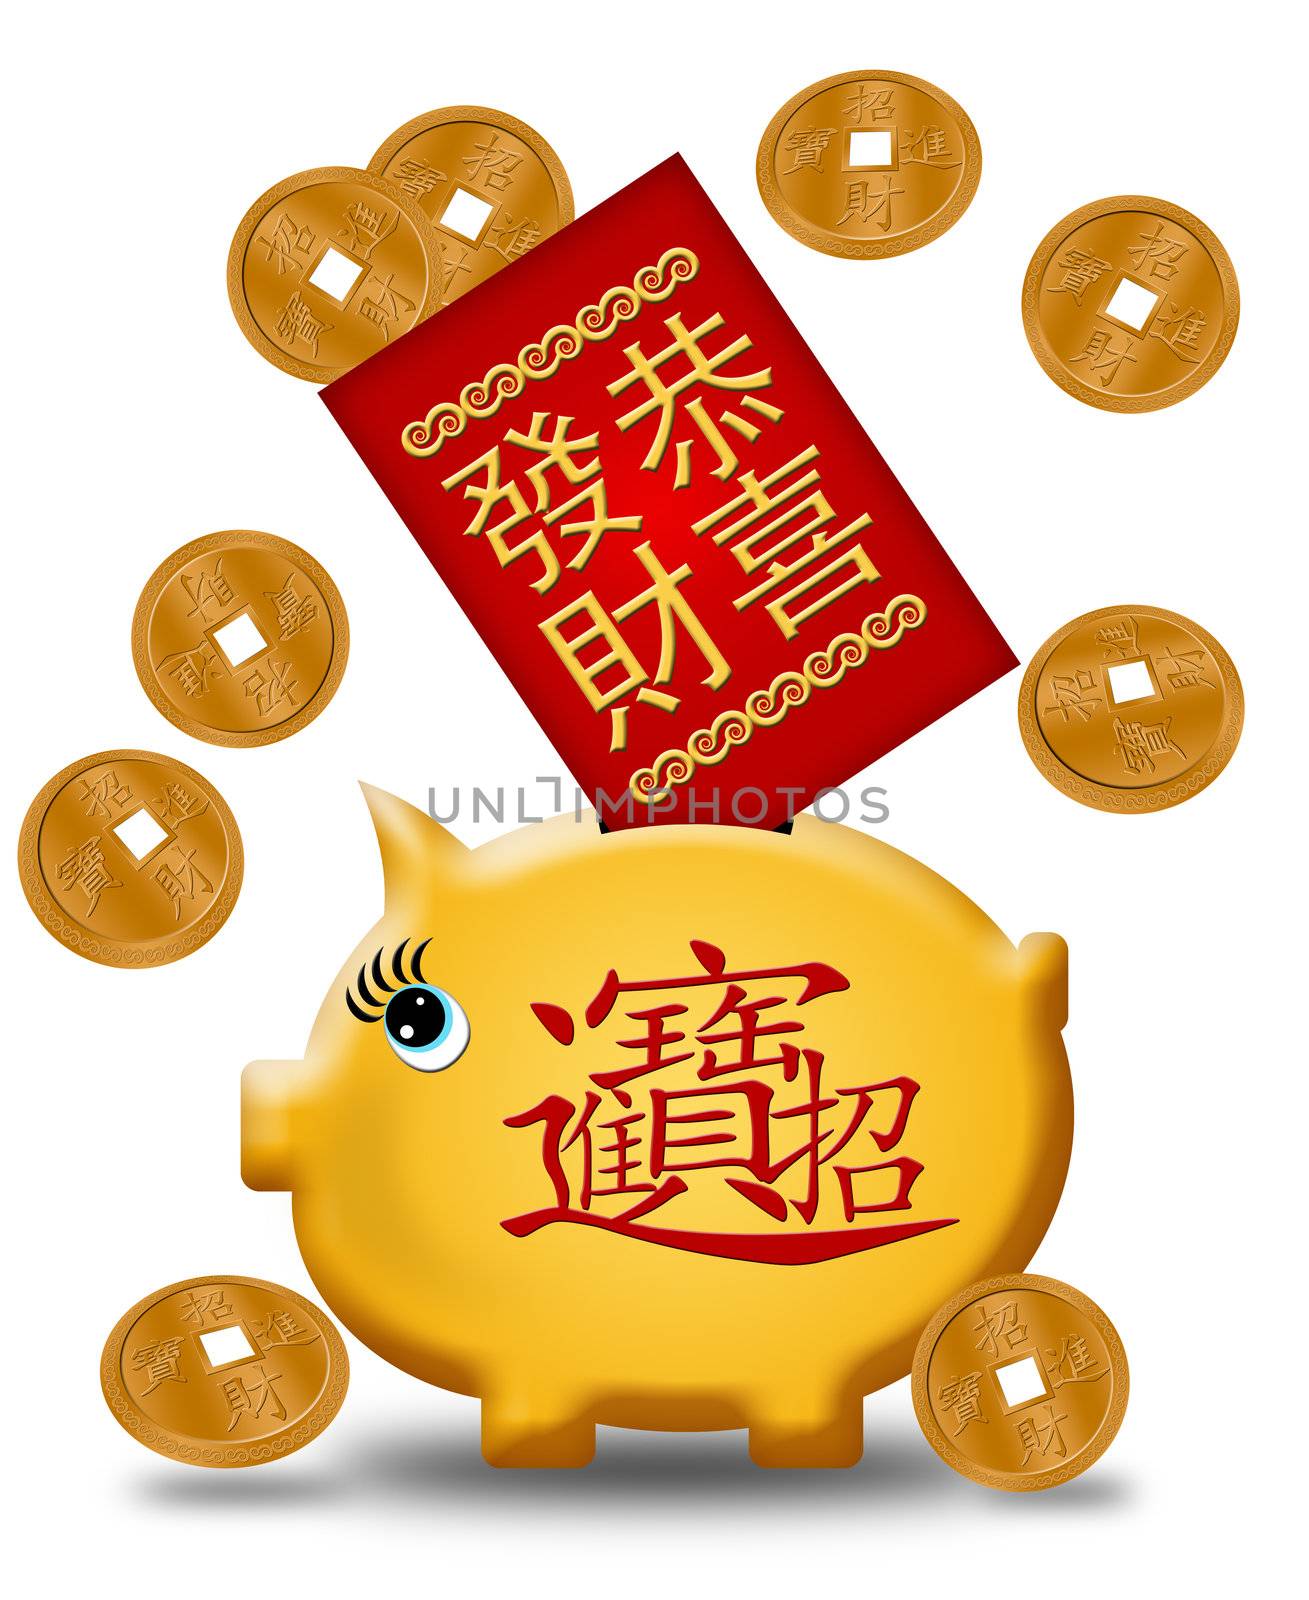 Chinese New Year Piggy Bank Illustration with Red Packet Gold Coins on White